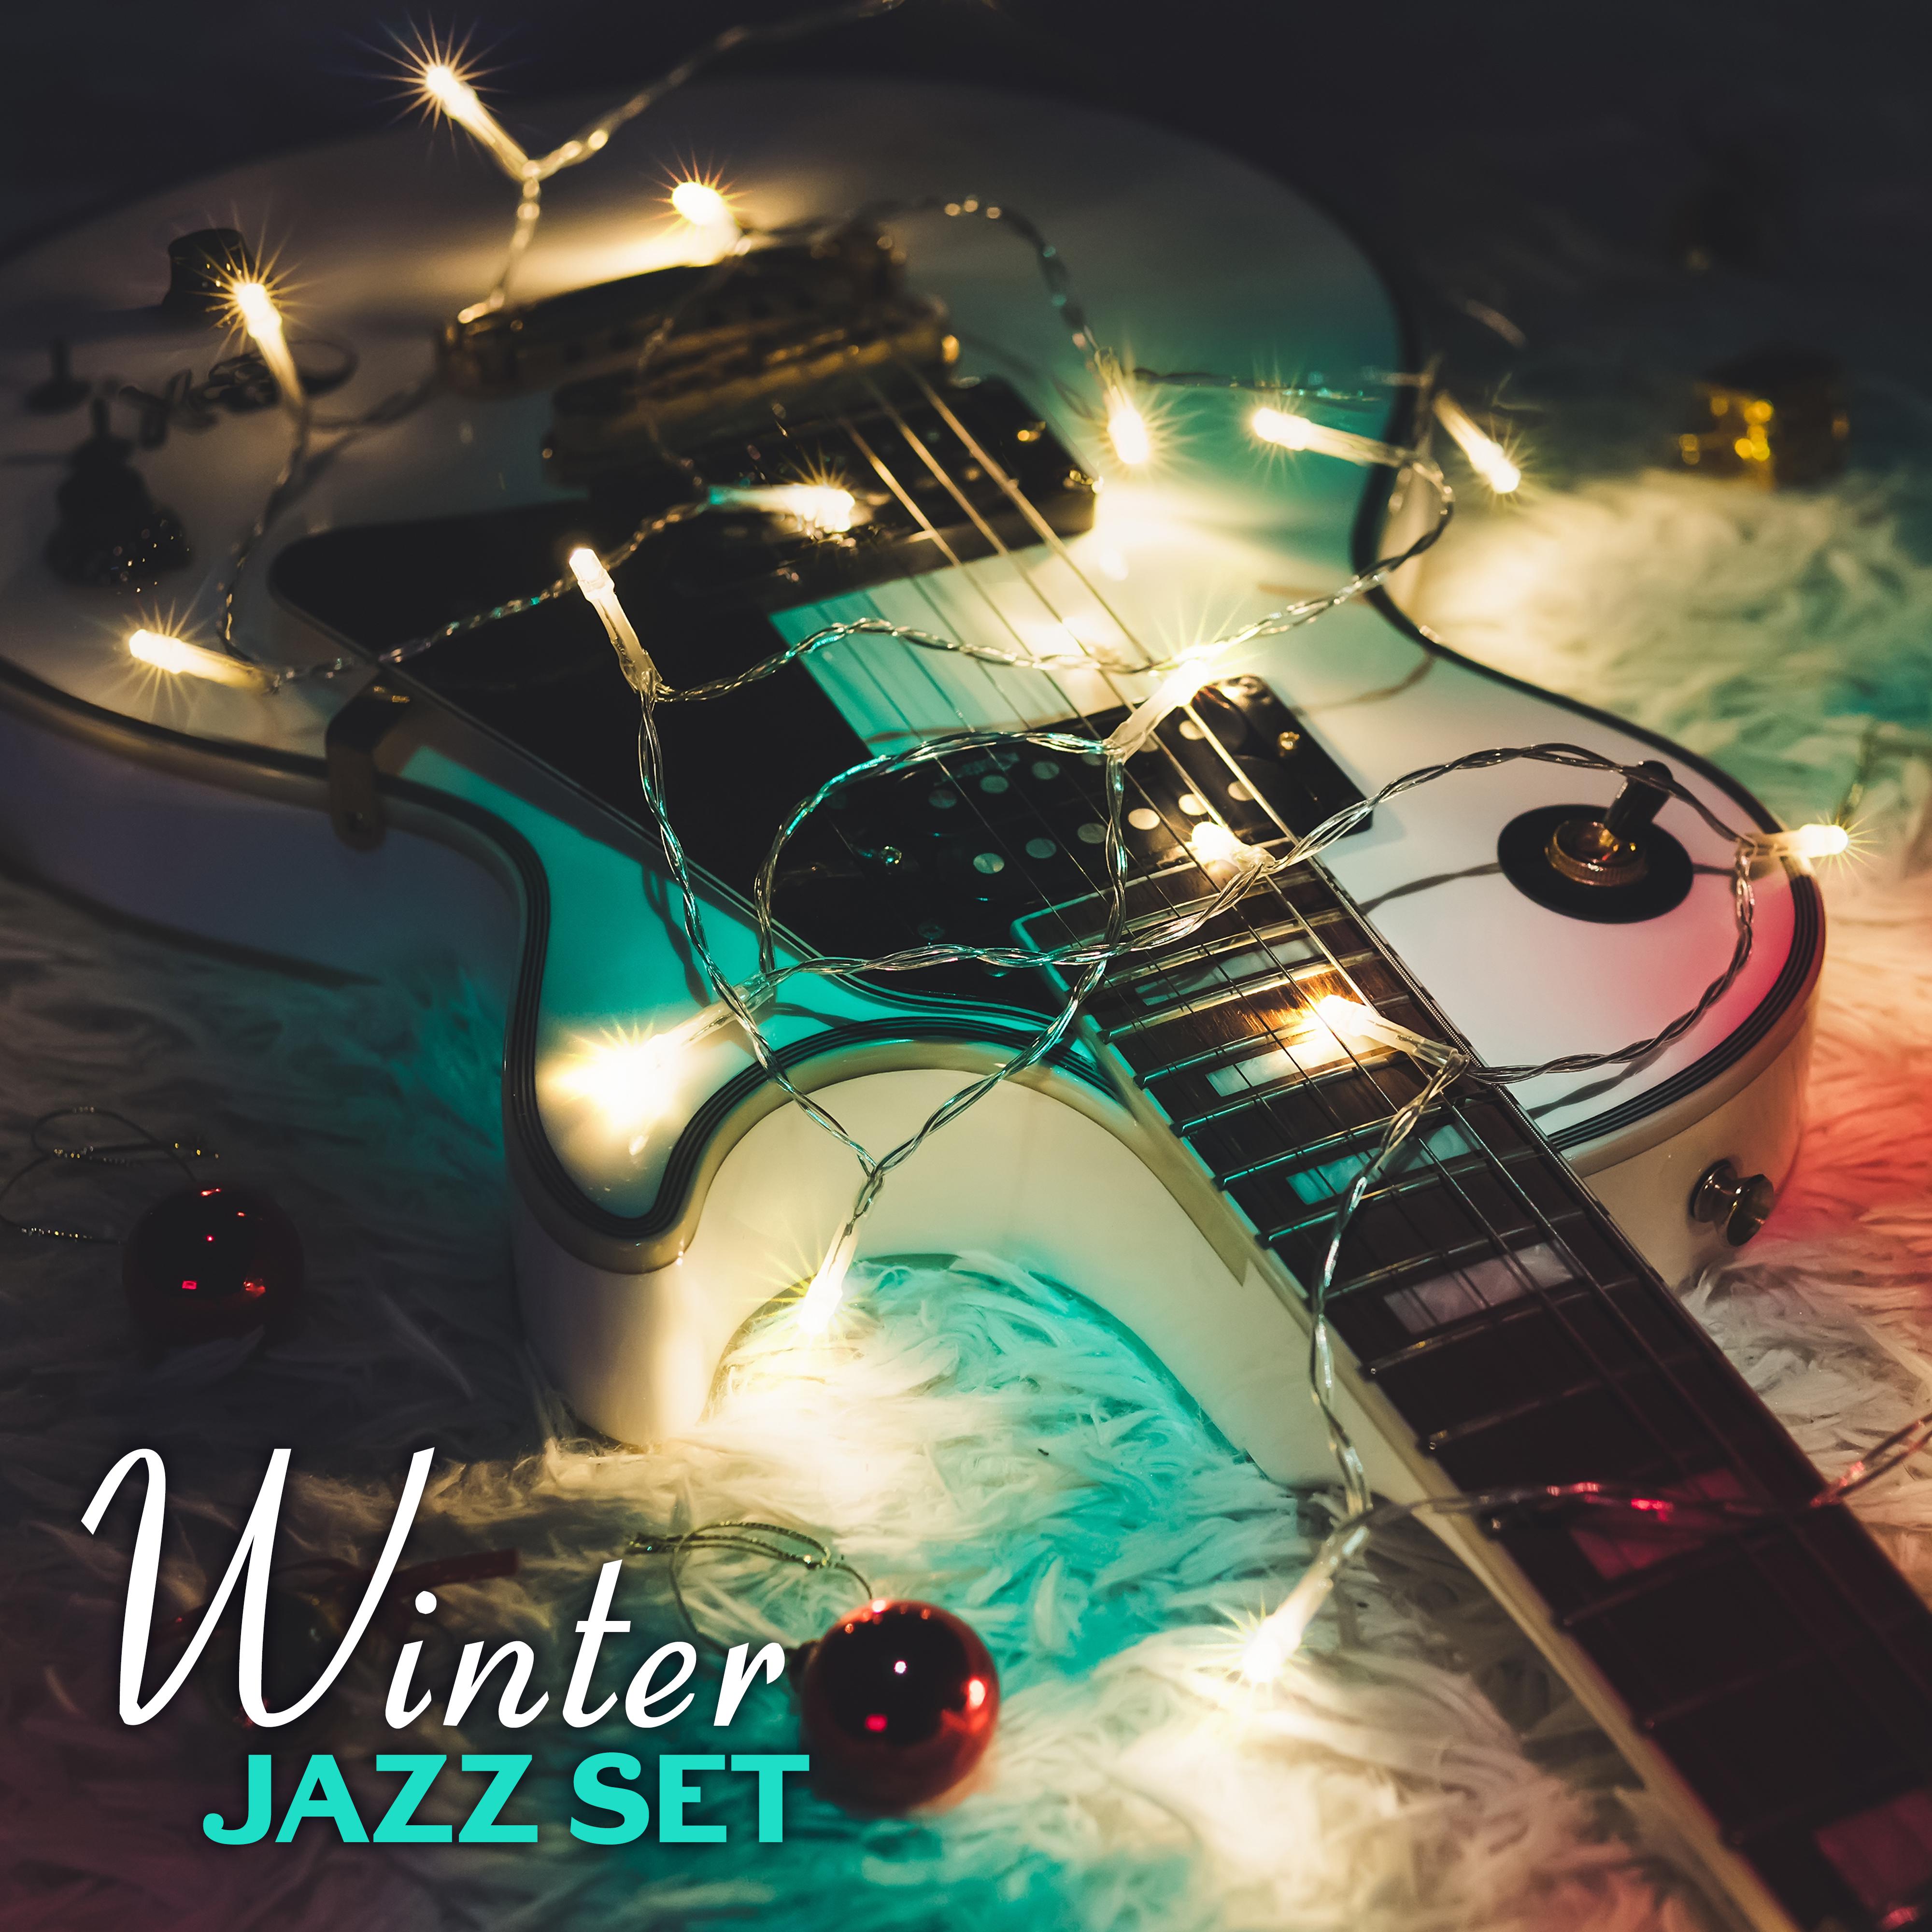 Winter Jazz Set - 15 Warming Songs for the Winter of 2018/19